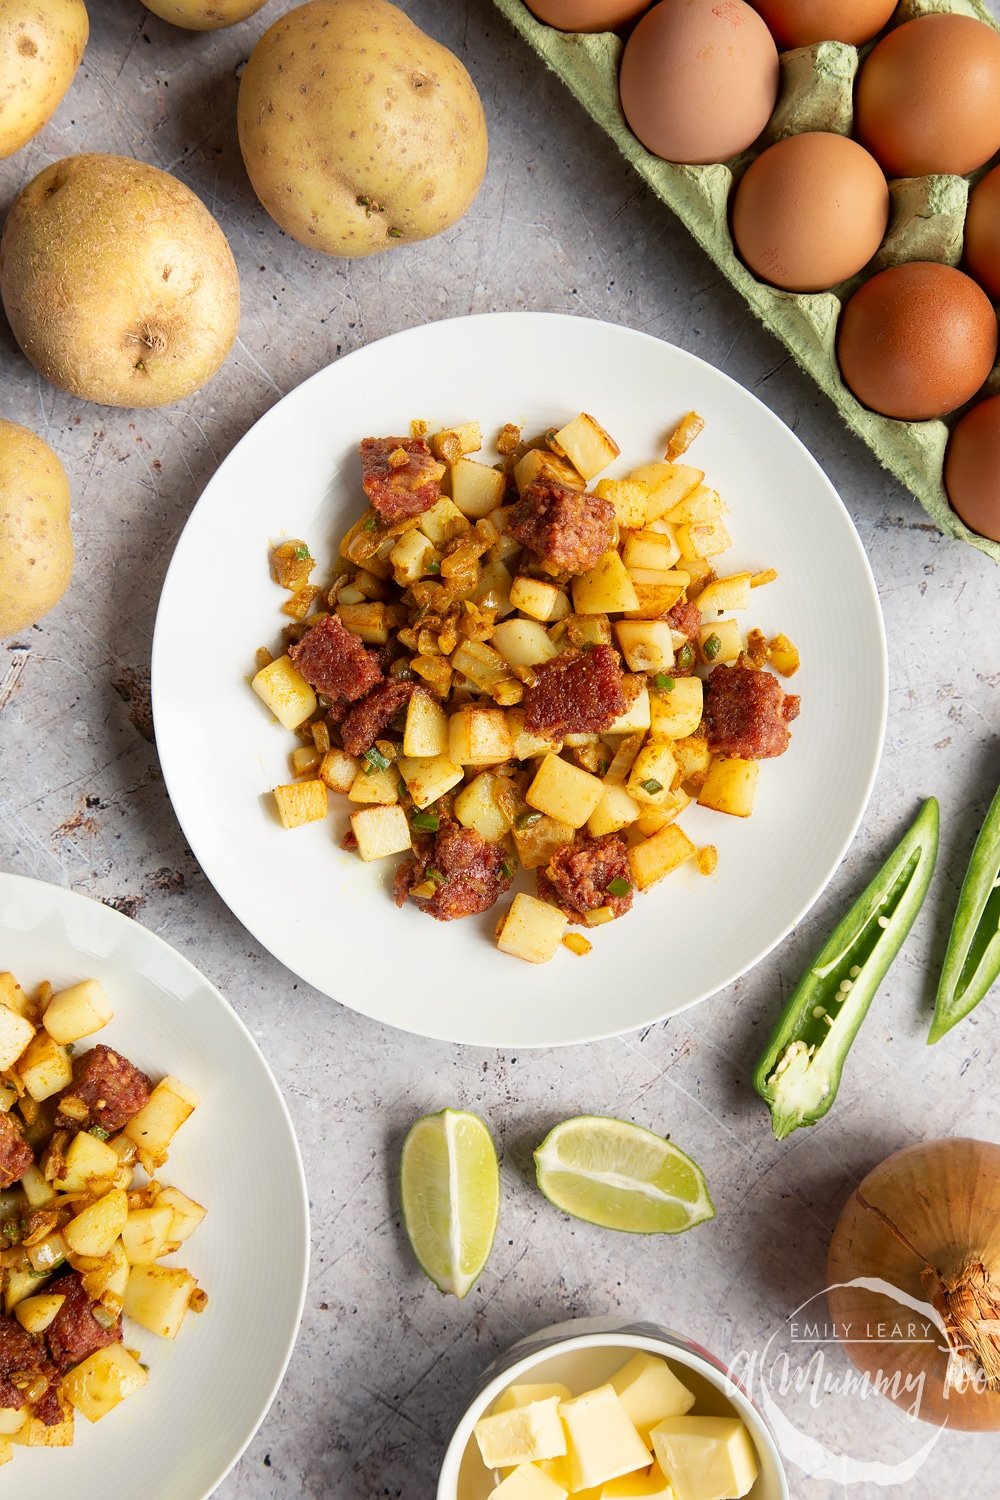 Serve your curried corn beef hash to two plates